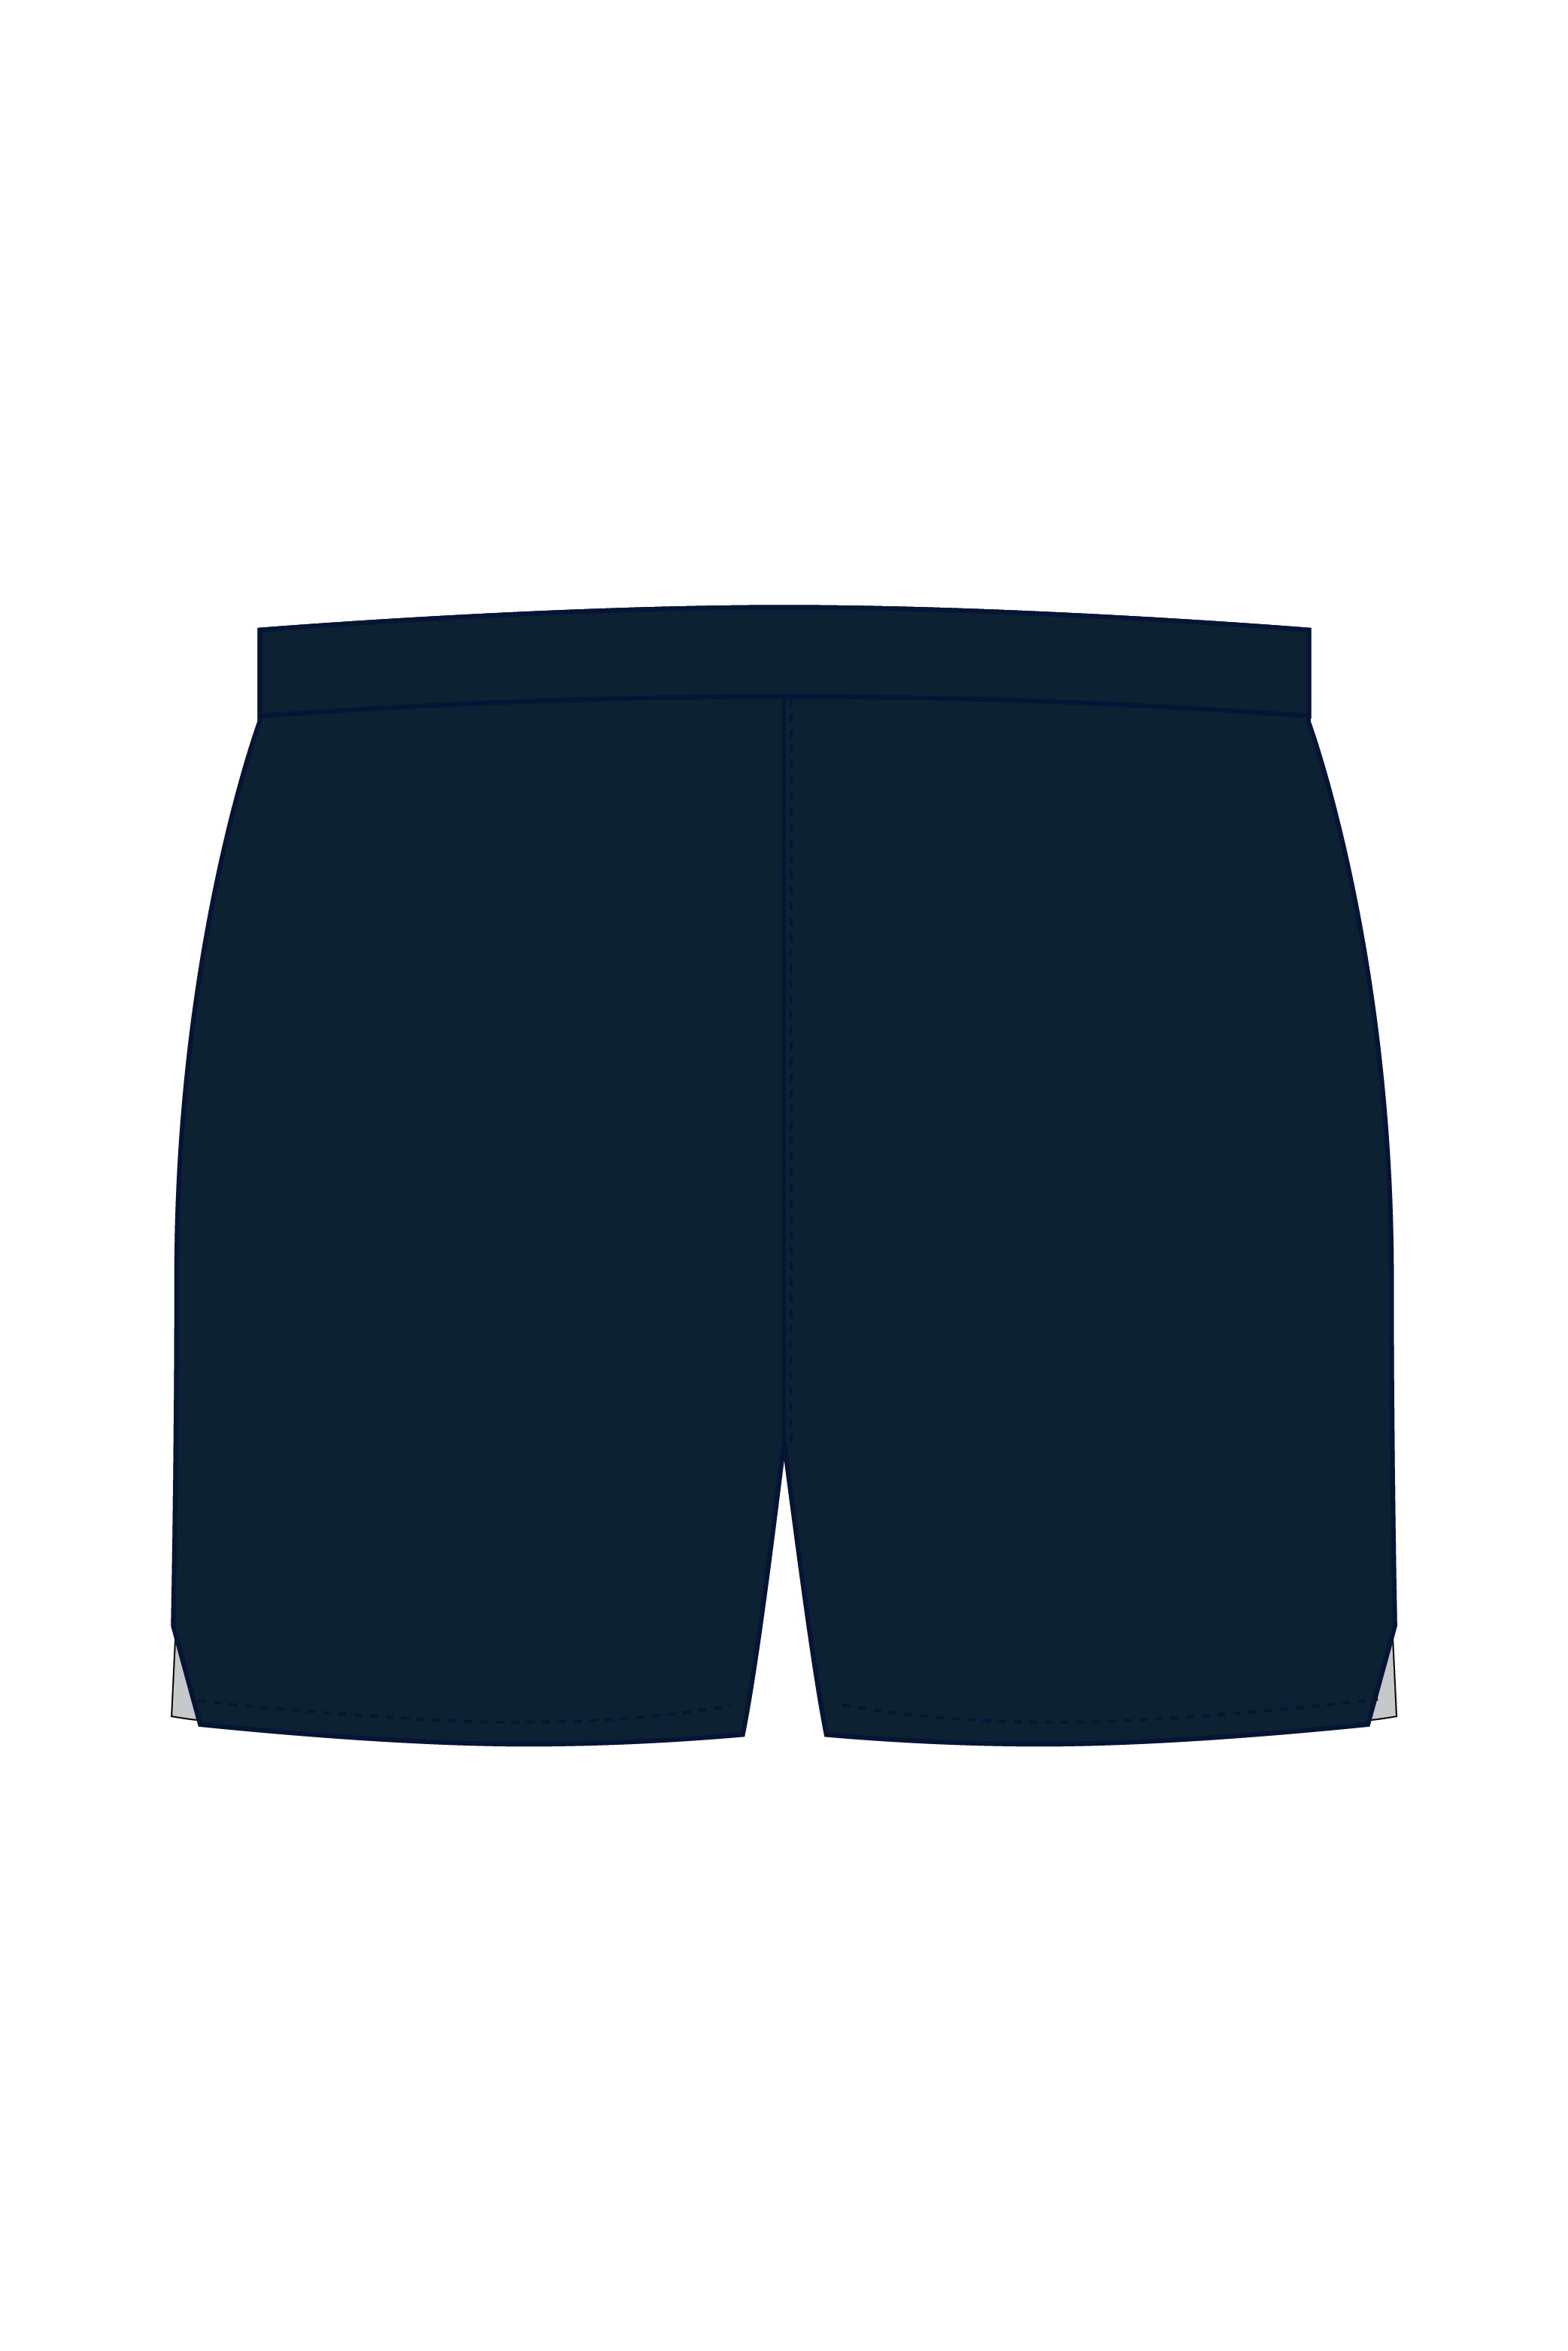 Manly Swimming Club Men's Shorts